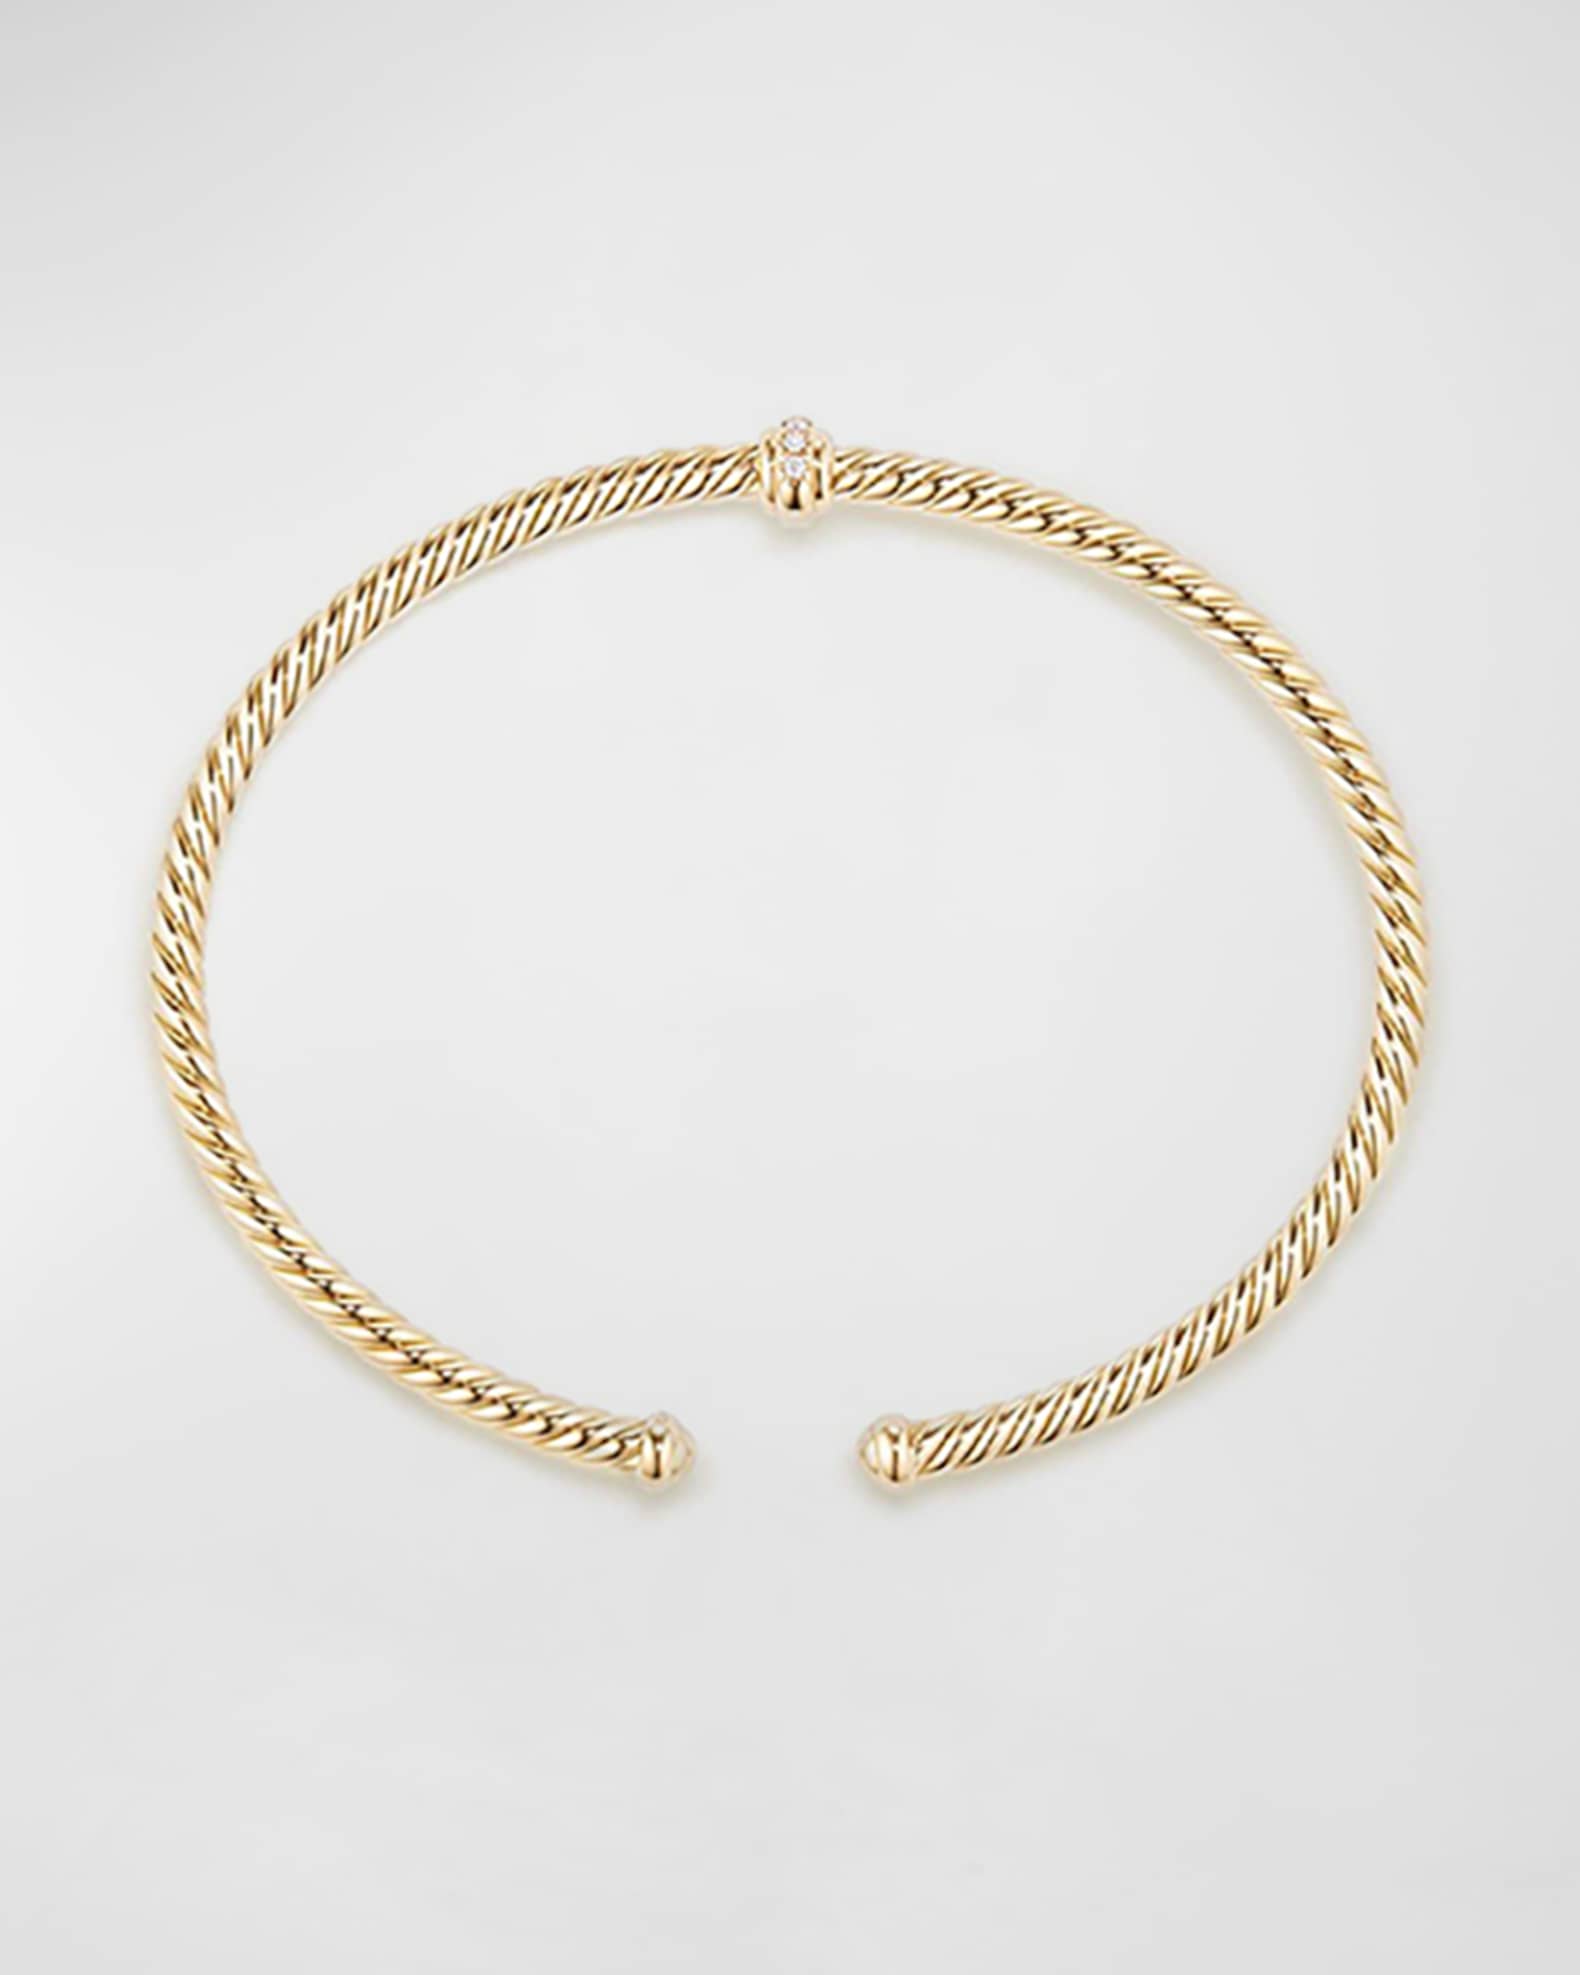 Cablespira Bracelets with Diamond-Station in 18K Gold, 3mm | Neiman Marcus